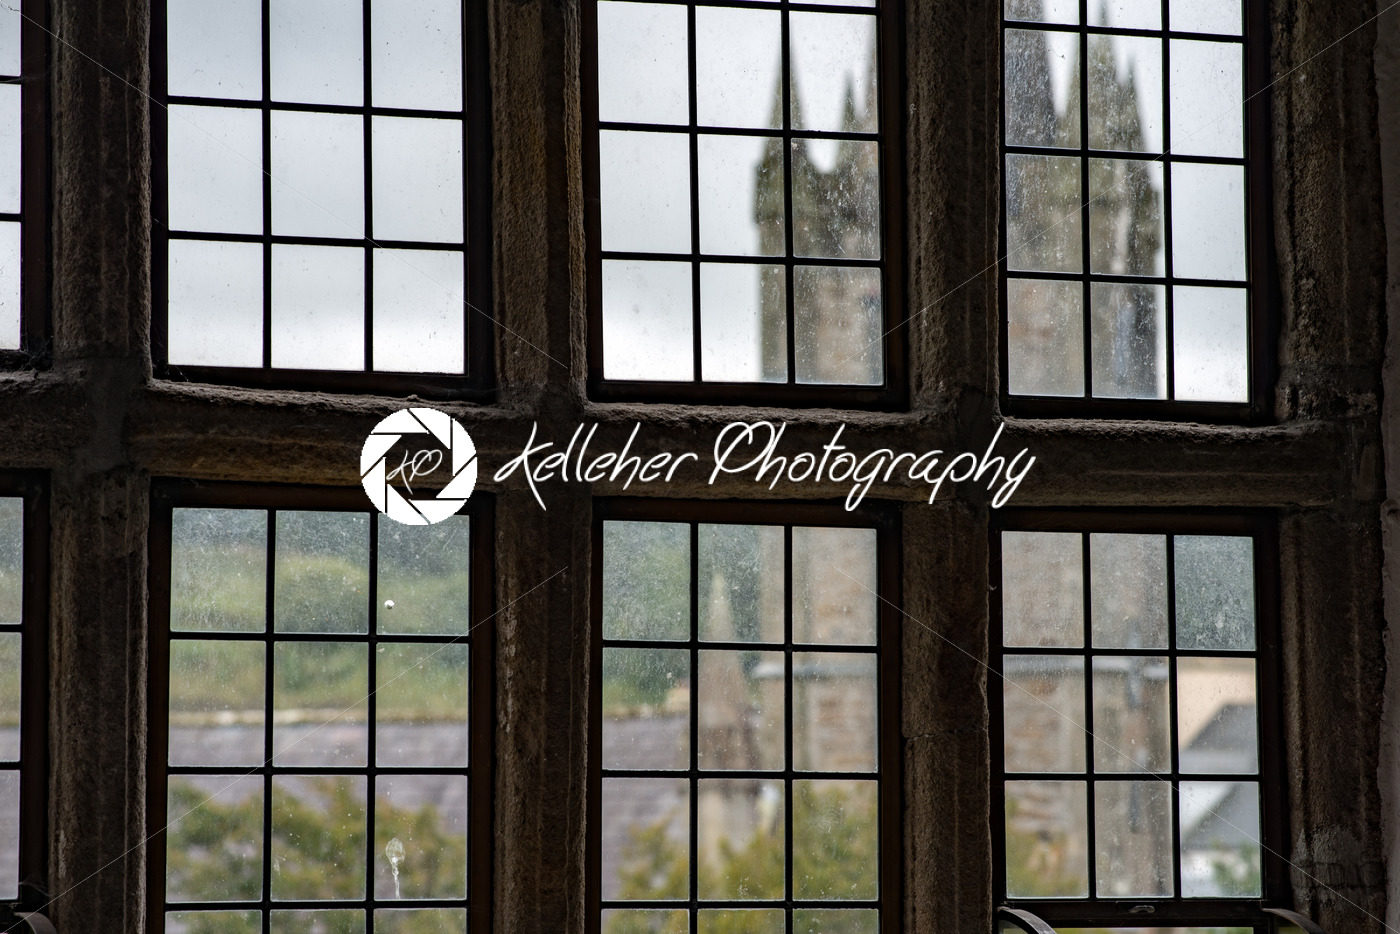 DONEGAL, IRELAND – AUGUST 25, 2017: Donegal Castle in Donegal town Ireland - Kelleher Photography Store